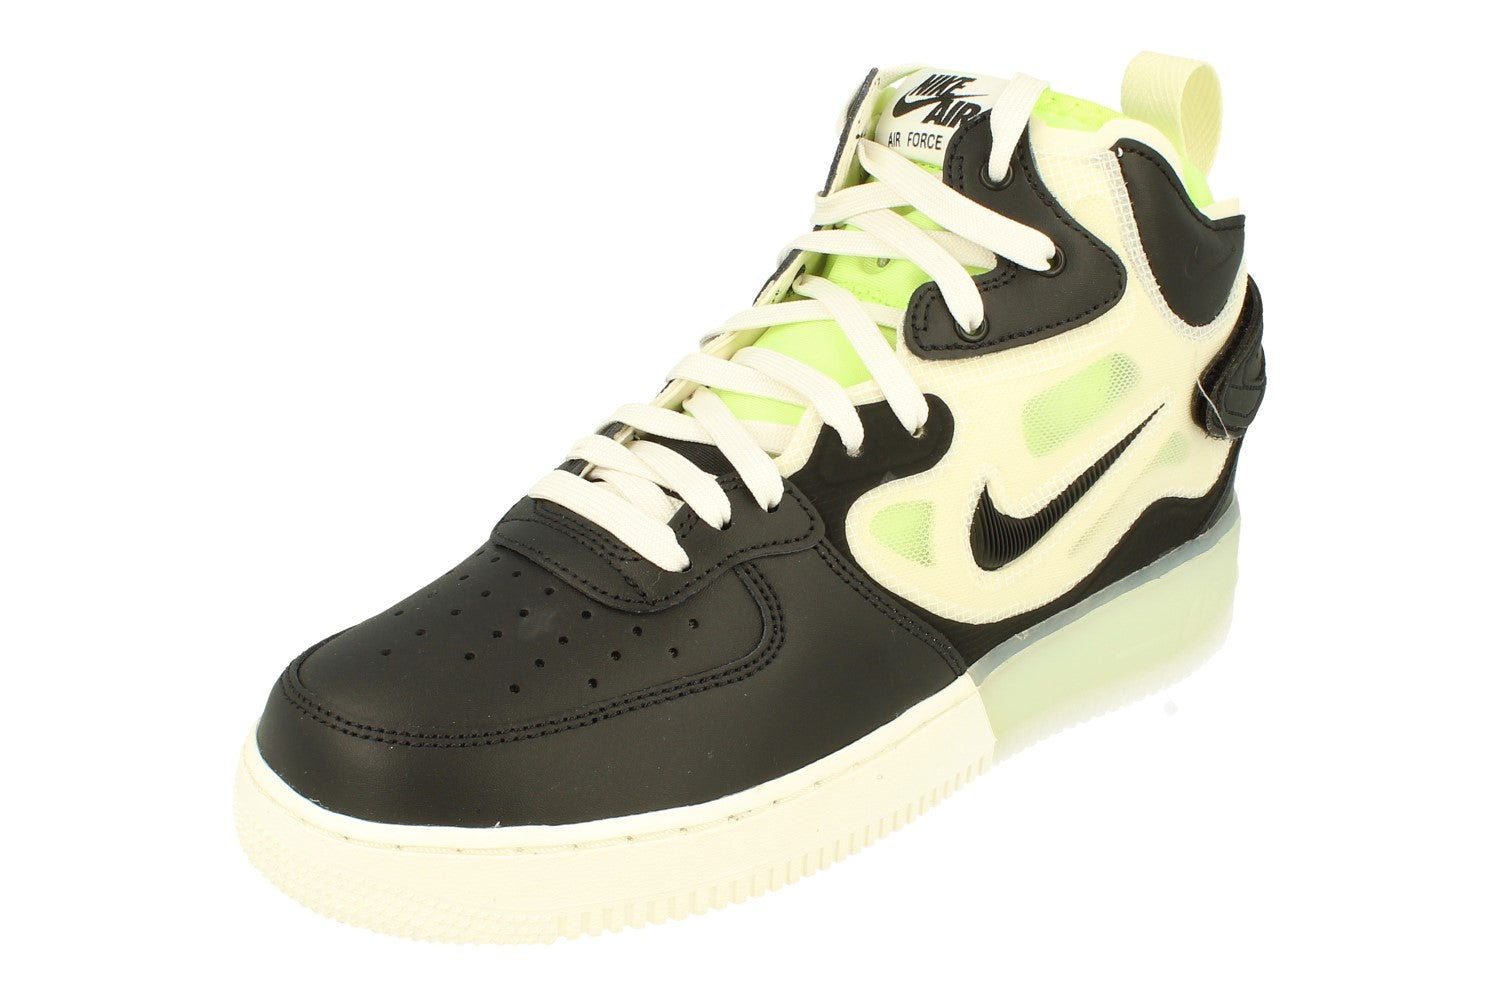 Nike Men's Air Force 1 Mid '07 LV8 Shoes in Black, Size: 8.5 | DZ2554-001